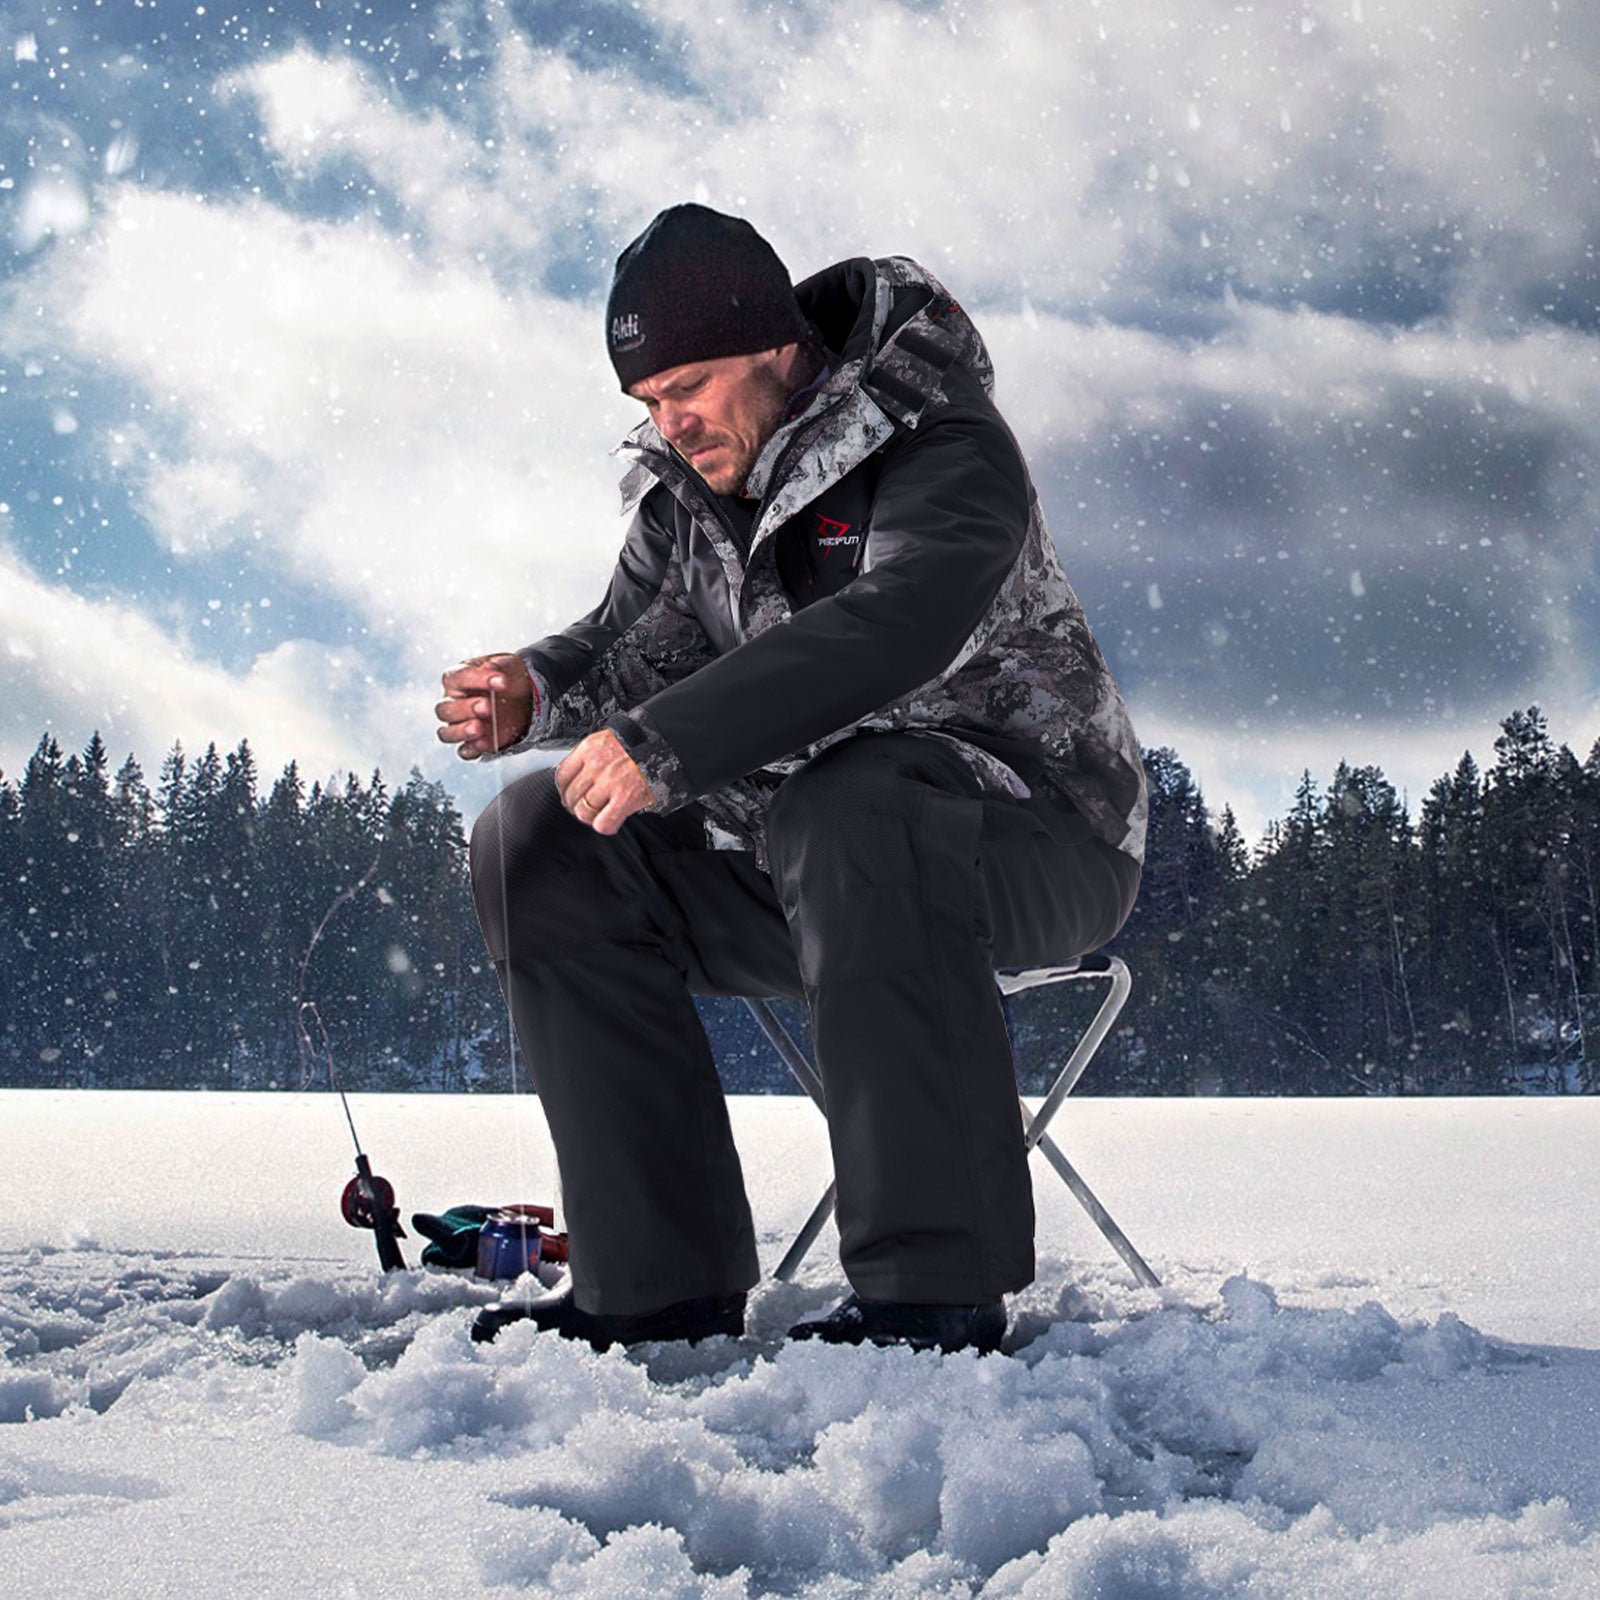 Ice Fishing Suits, Insulated Jacket & Bibs